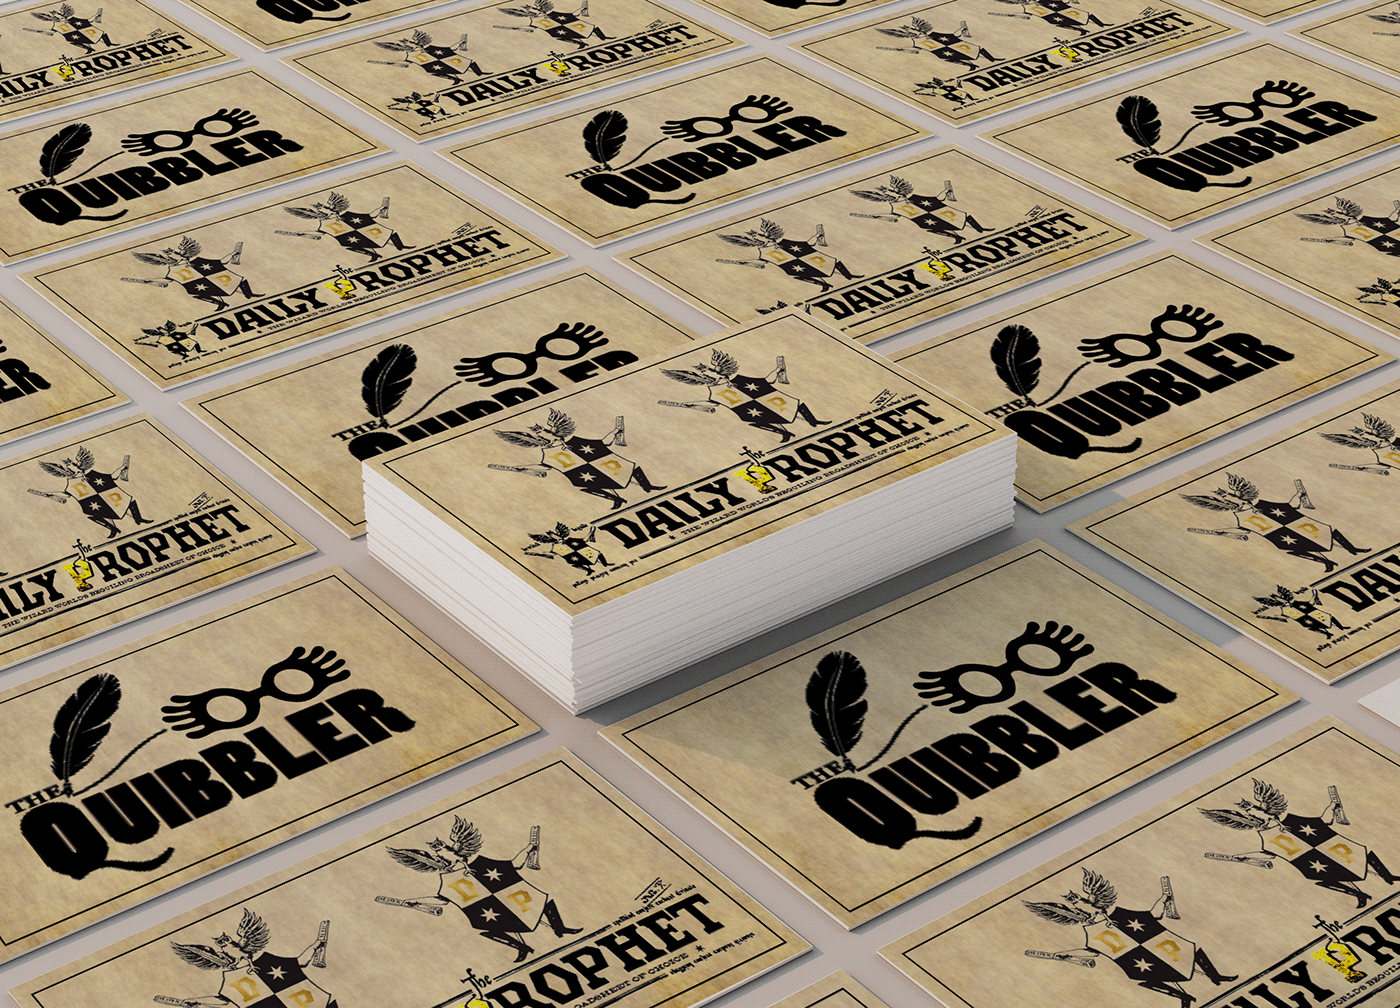 Daily Prophet and Quibbler cards that are simply laden with Harry Potter easter eggs!